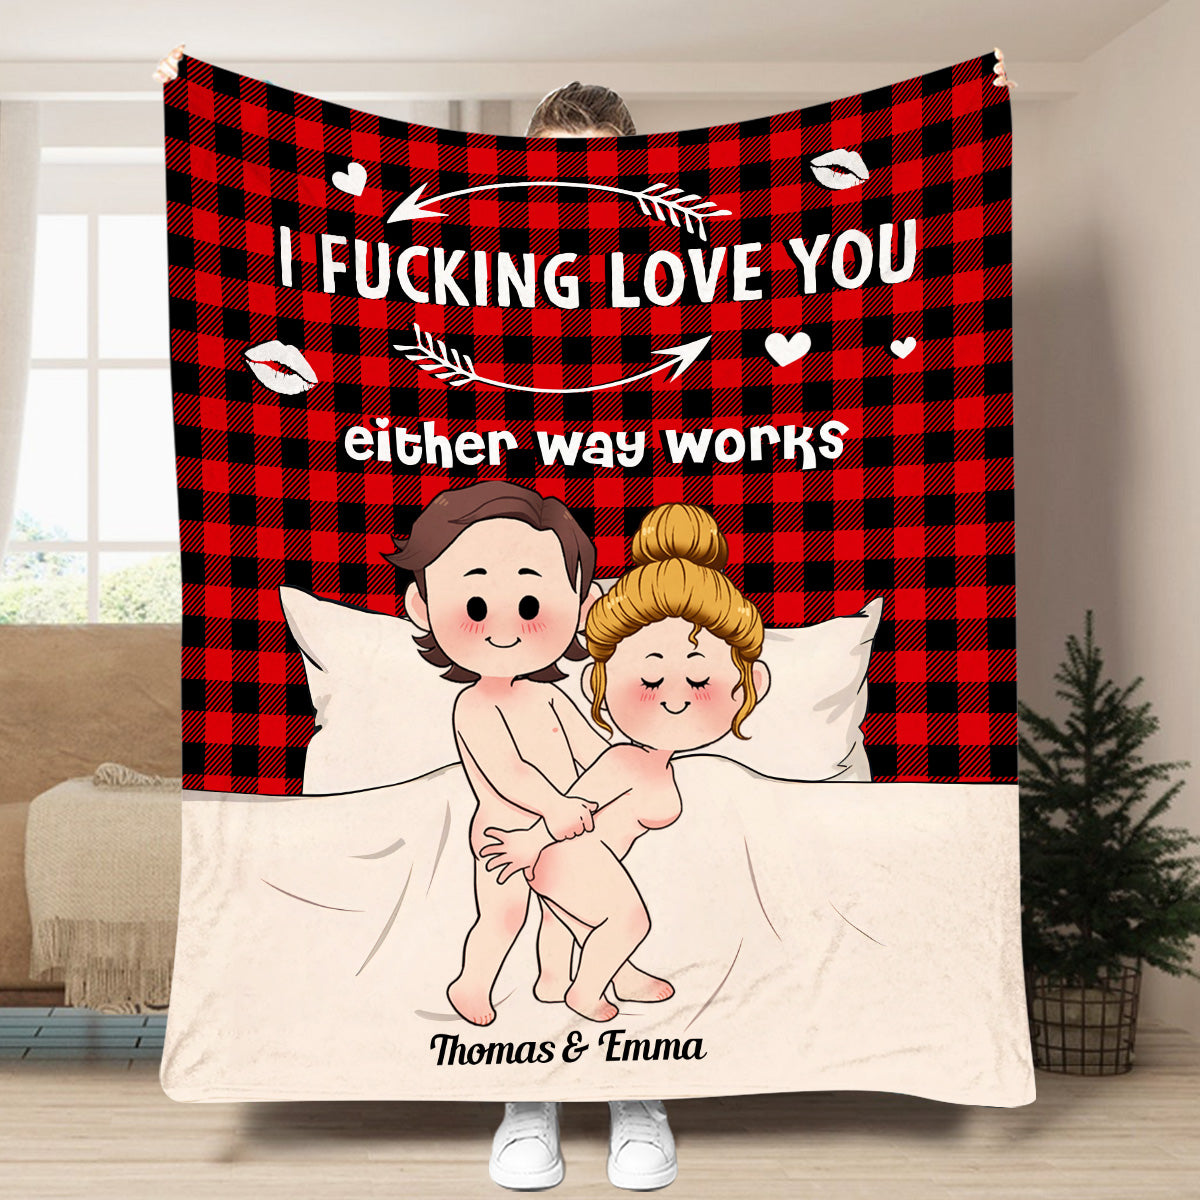 I Love Your Butt - Personalized Adult Couple Content Fleece Blanket